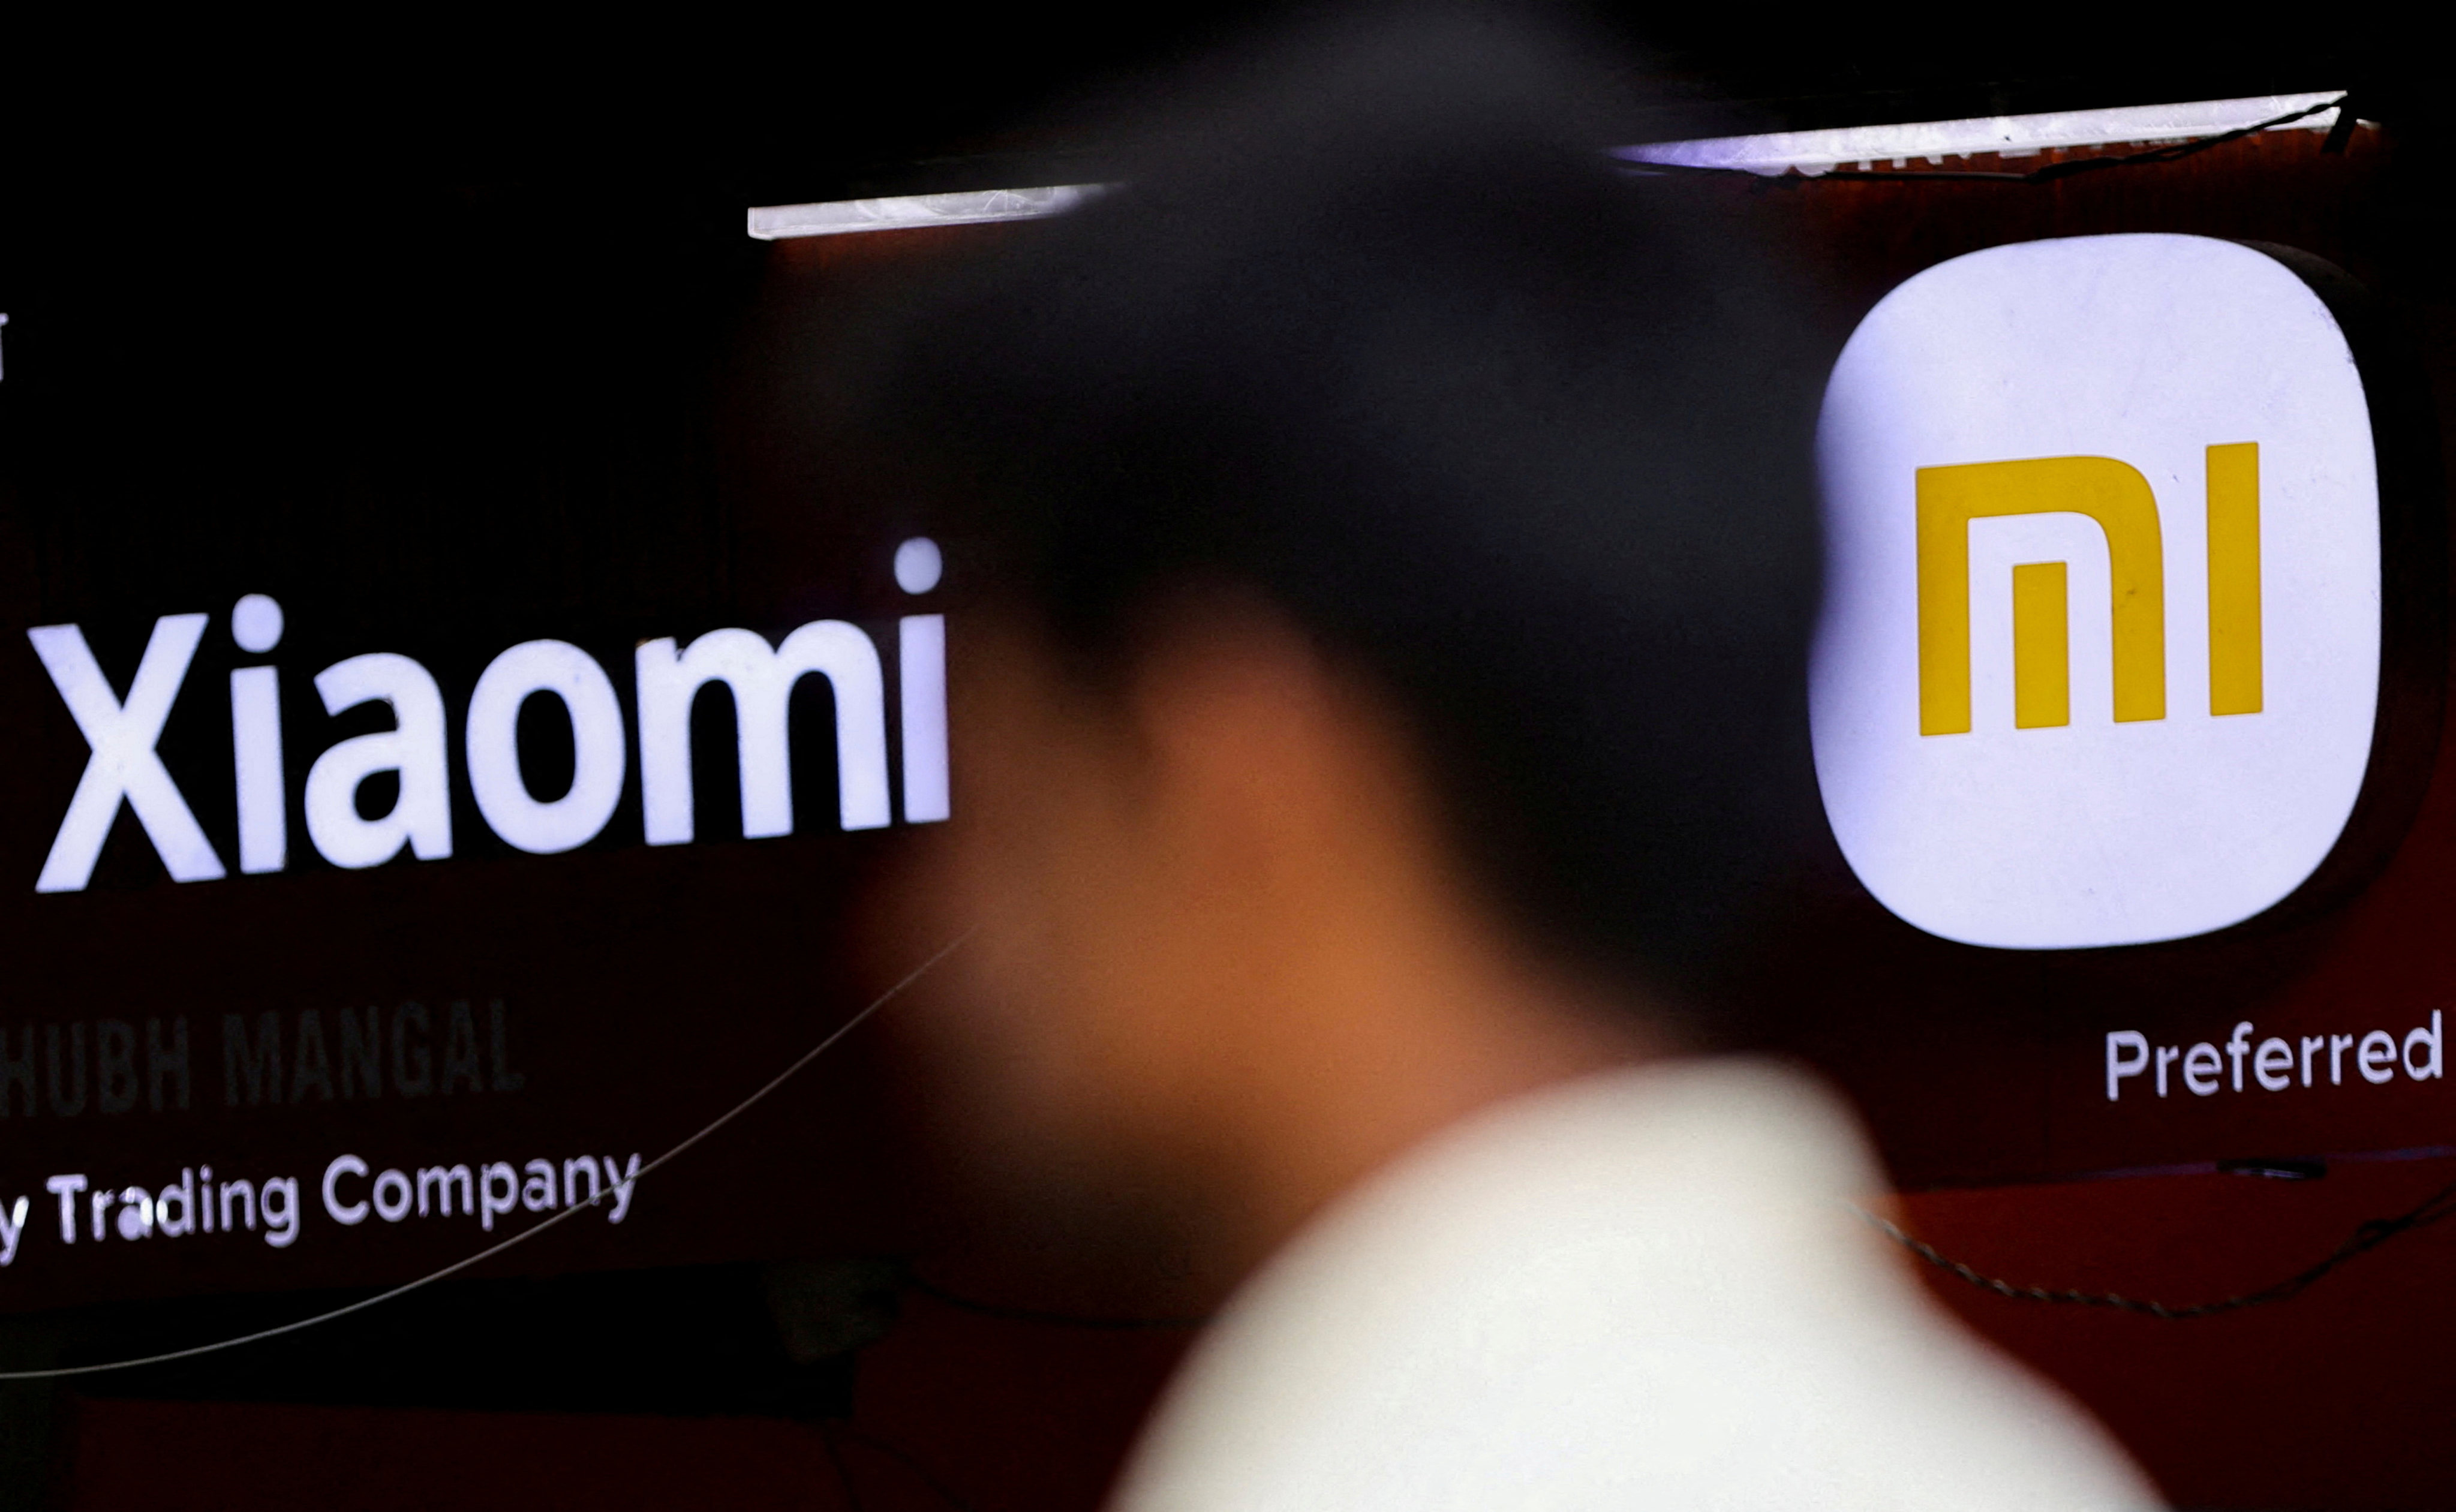 Xiaomi more than doubled its profits in the second quarter as a smartphone slump shows signs of bottoming out. Photo: Reuters